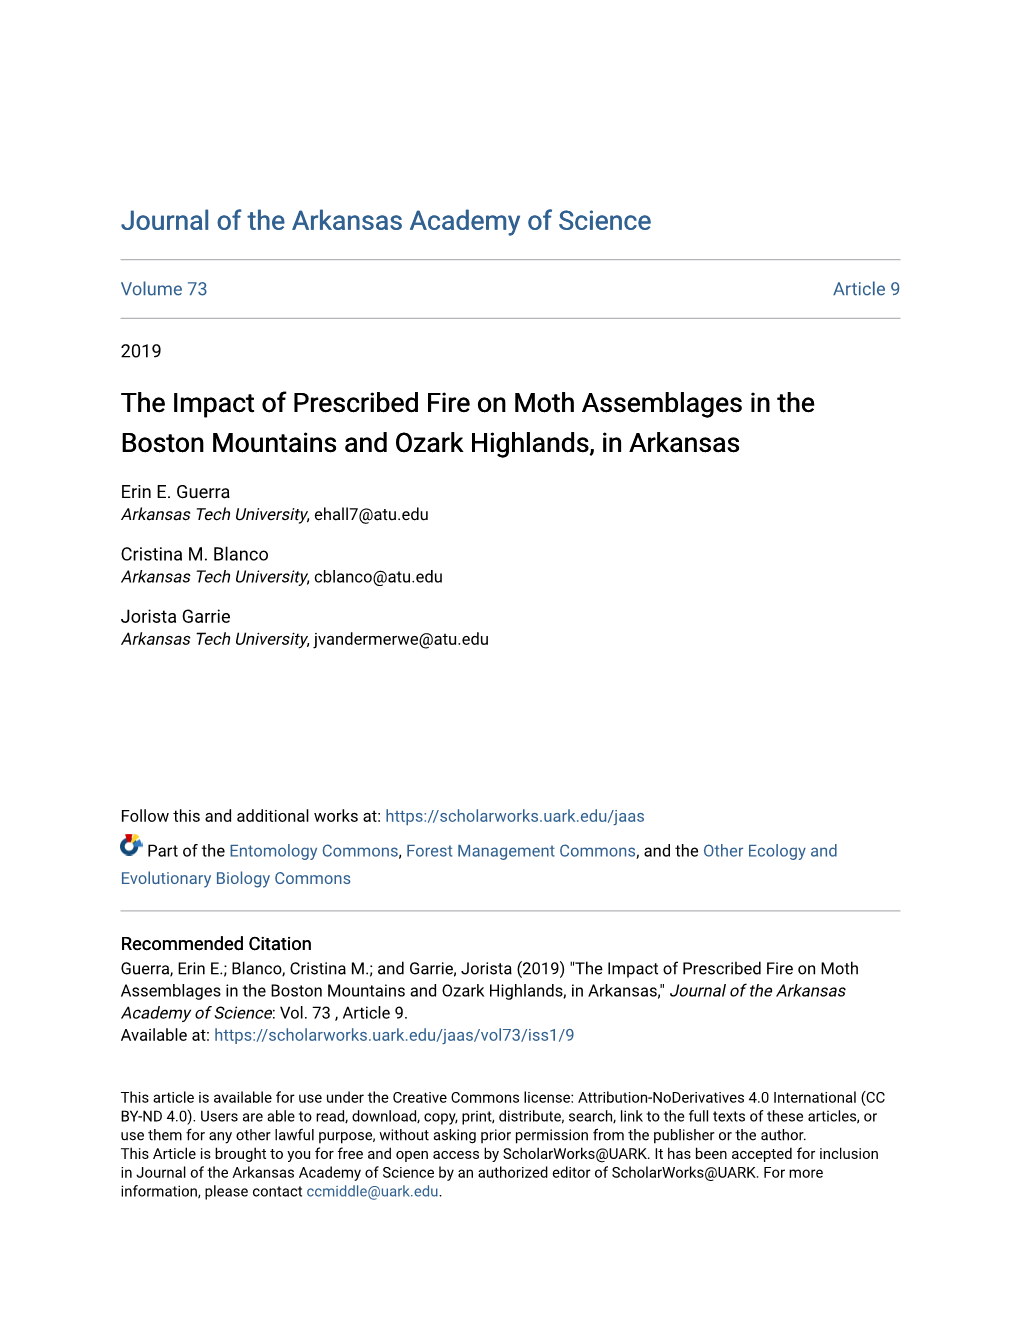 The Impact of Prescribed Fire on Moth Assemblages in the Boston Mountains and Ozark Highlands, in Arkansas